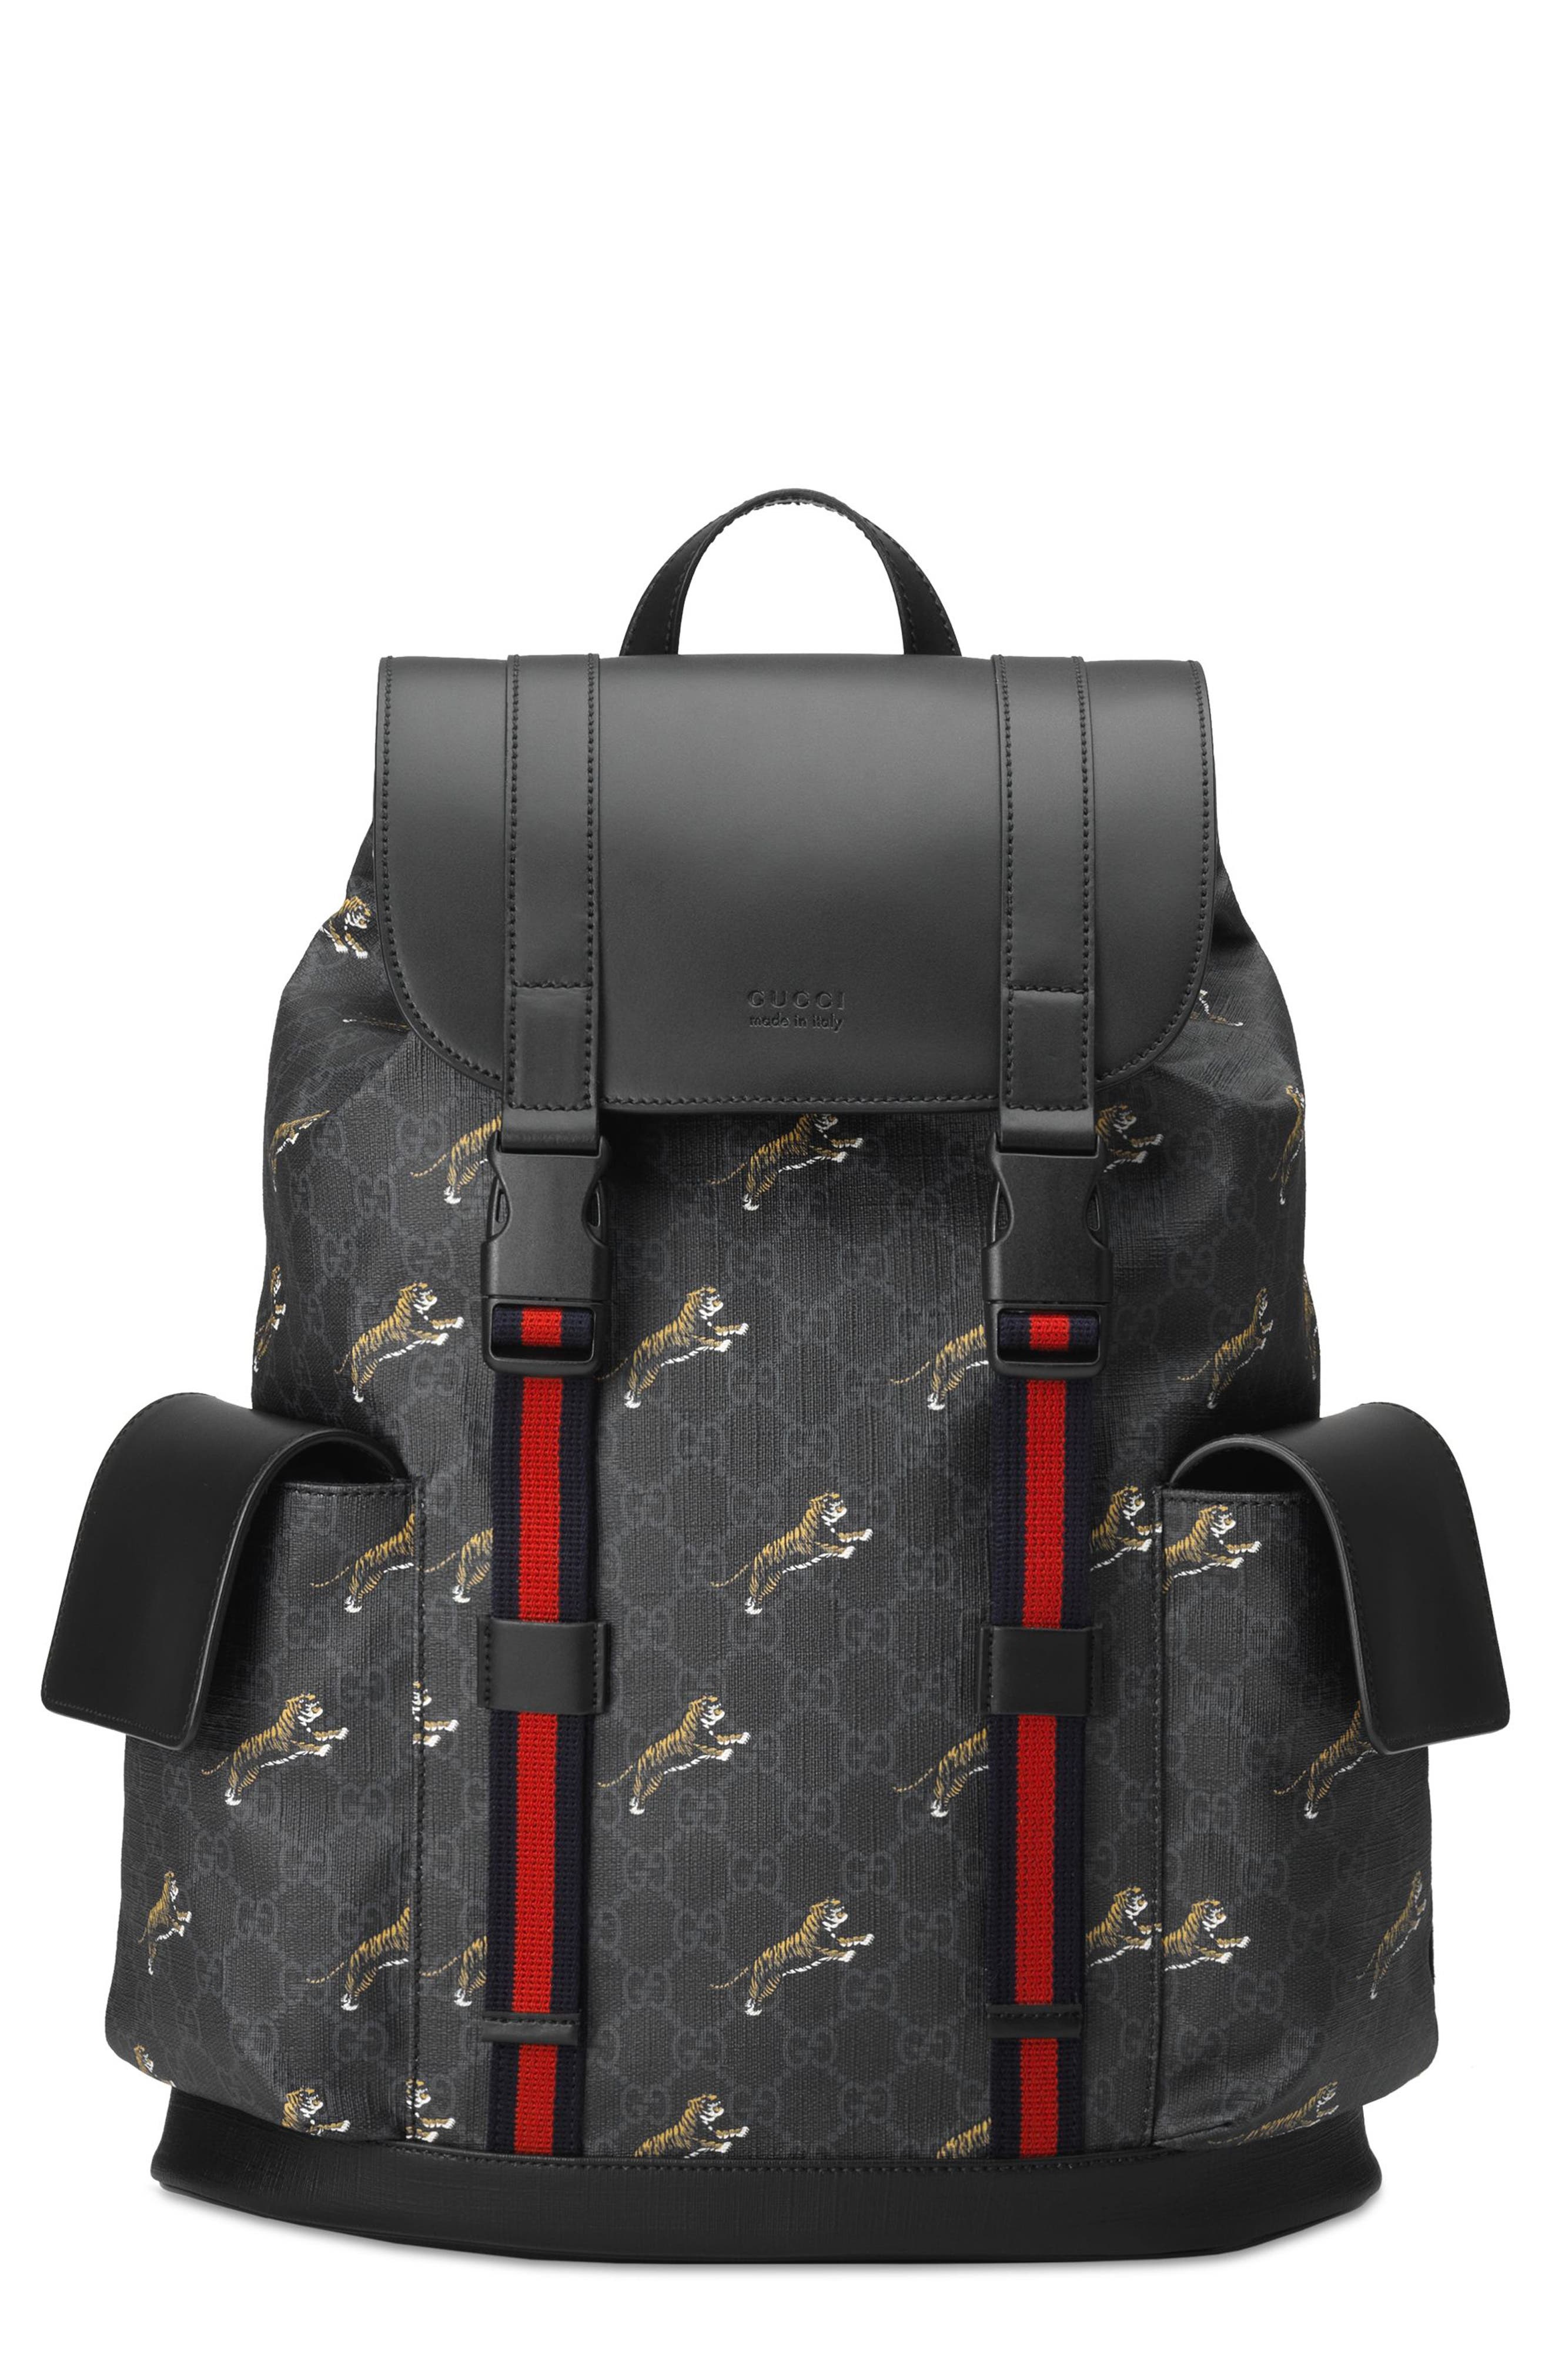 gucci tiger backpack